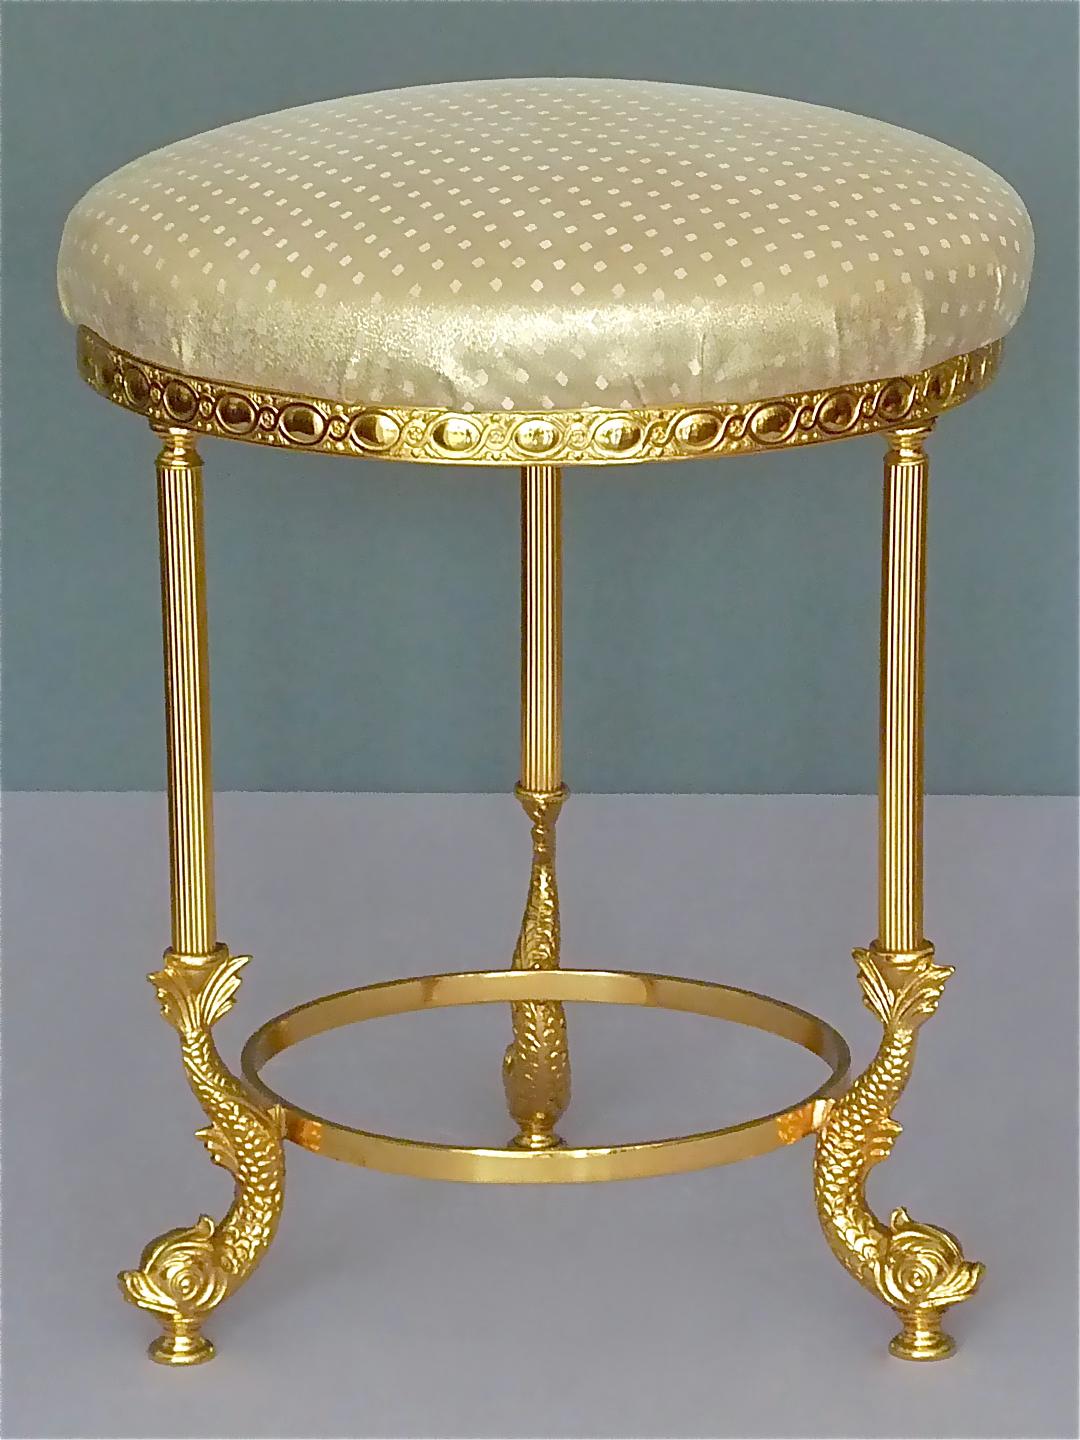 Fantastic and rare high quality gilt bronze brass metal three-leg dolphin vanity stool or side chair by Maison Lancel, France around 1950s to 1960s. The neoclassical midcentury dolphin stool with golden shimmering fabric upholstery in Hollywood